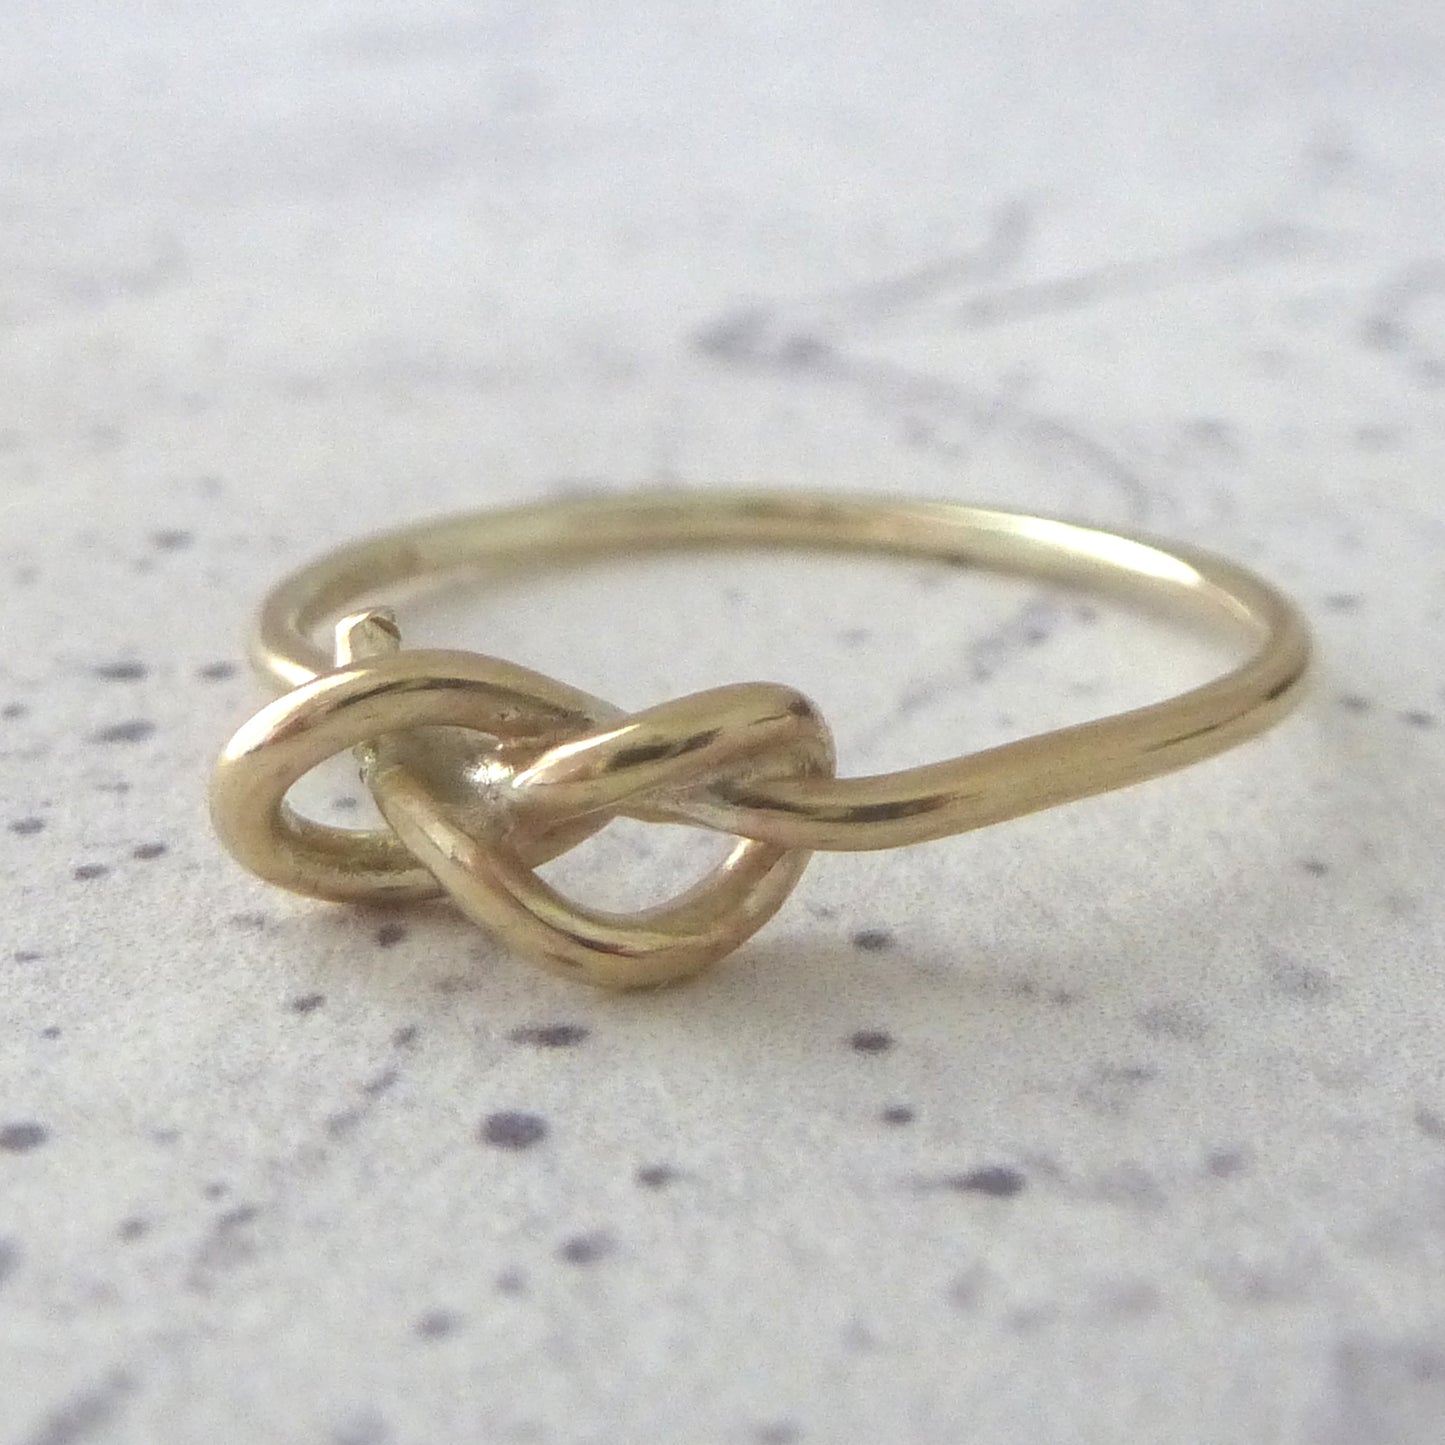 Slim 9ct yellow gold knot ring, close up